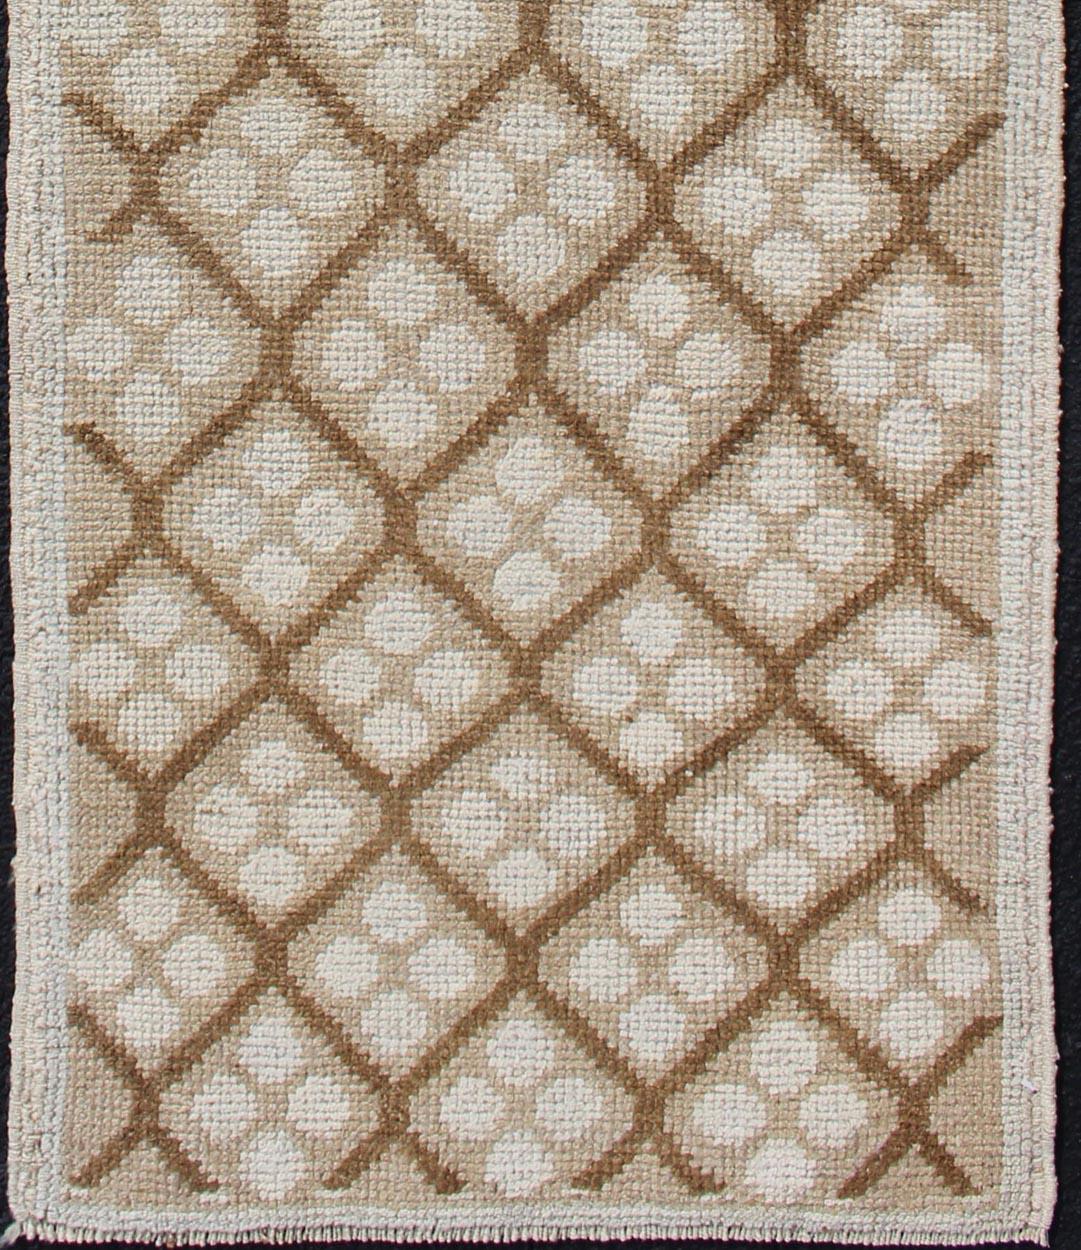 Measures: 2'1 x 6'7.
This lovely Vintage Oushak Runner features an all-over diamond design rendered in hues of cream and accentuated in shades of brown. This rug is finely suited for a variety of modern, transitional, classic and casual